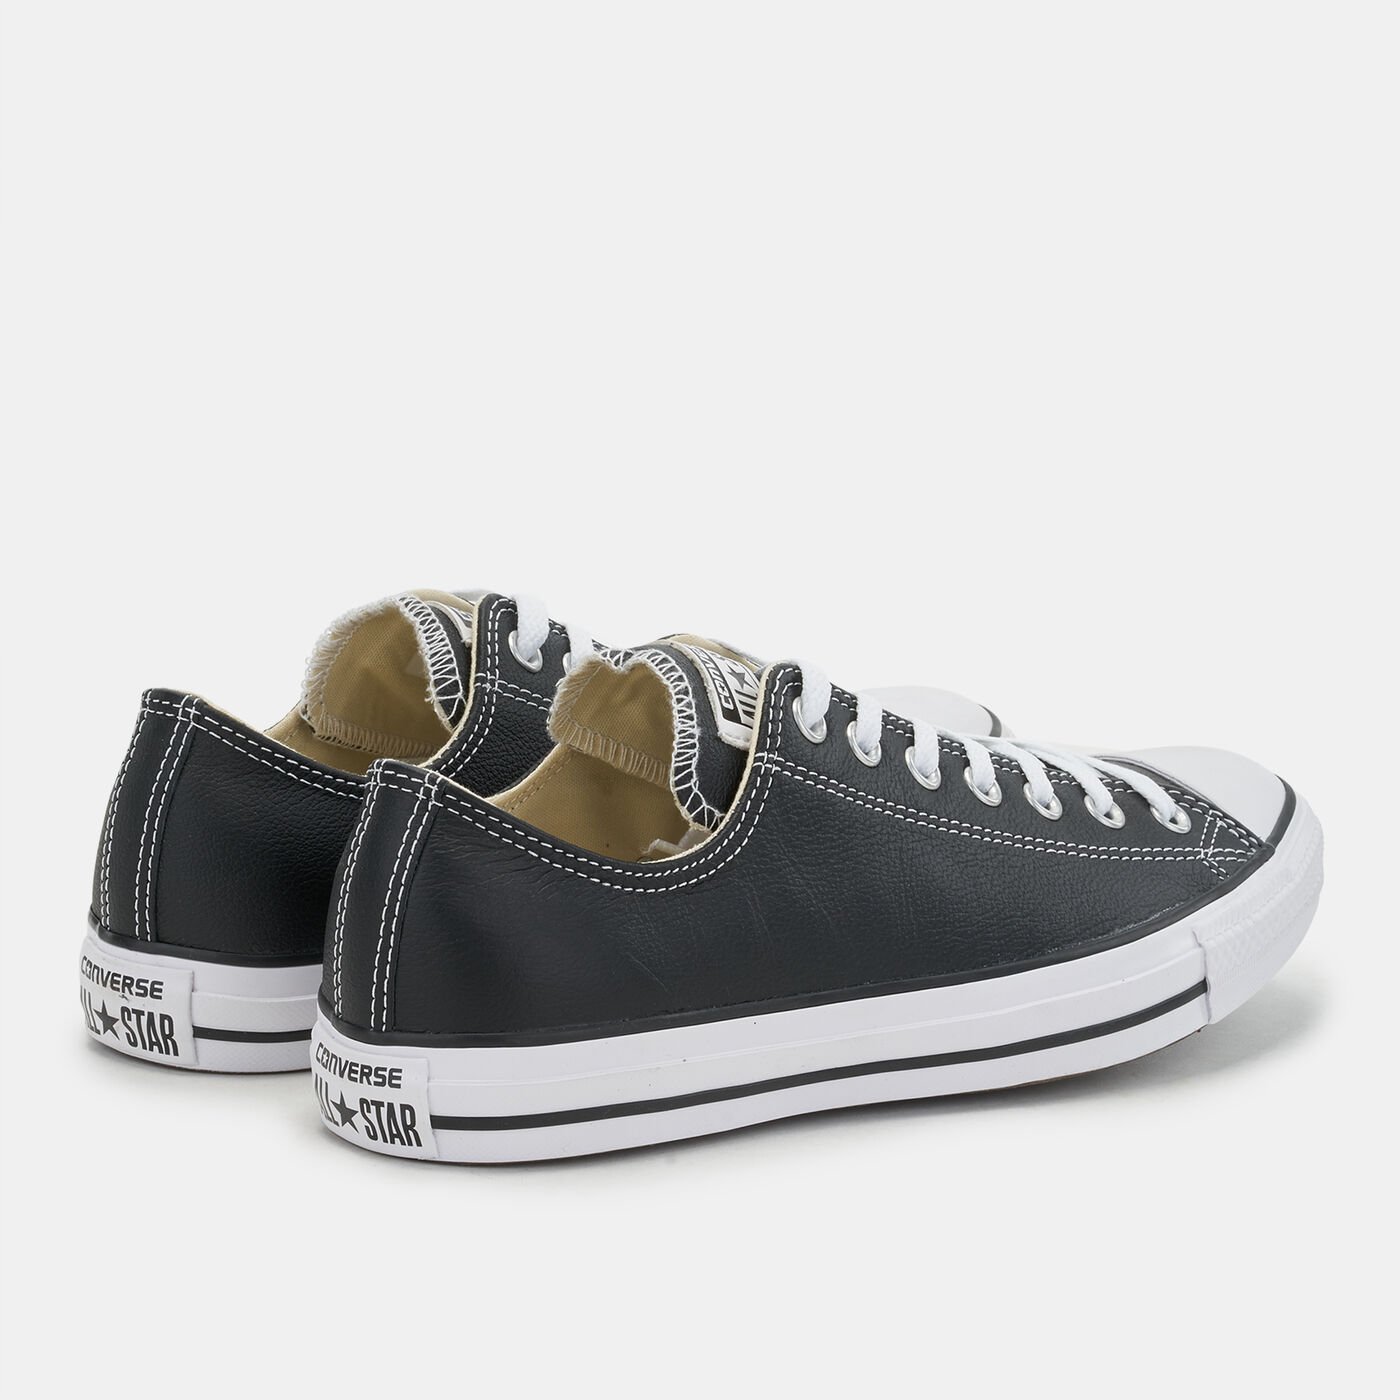 Chuck Taylor All Star Low-Top Leather Unisex Shoe